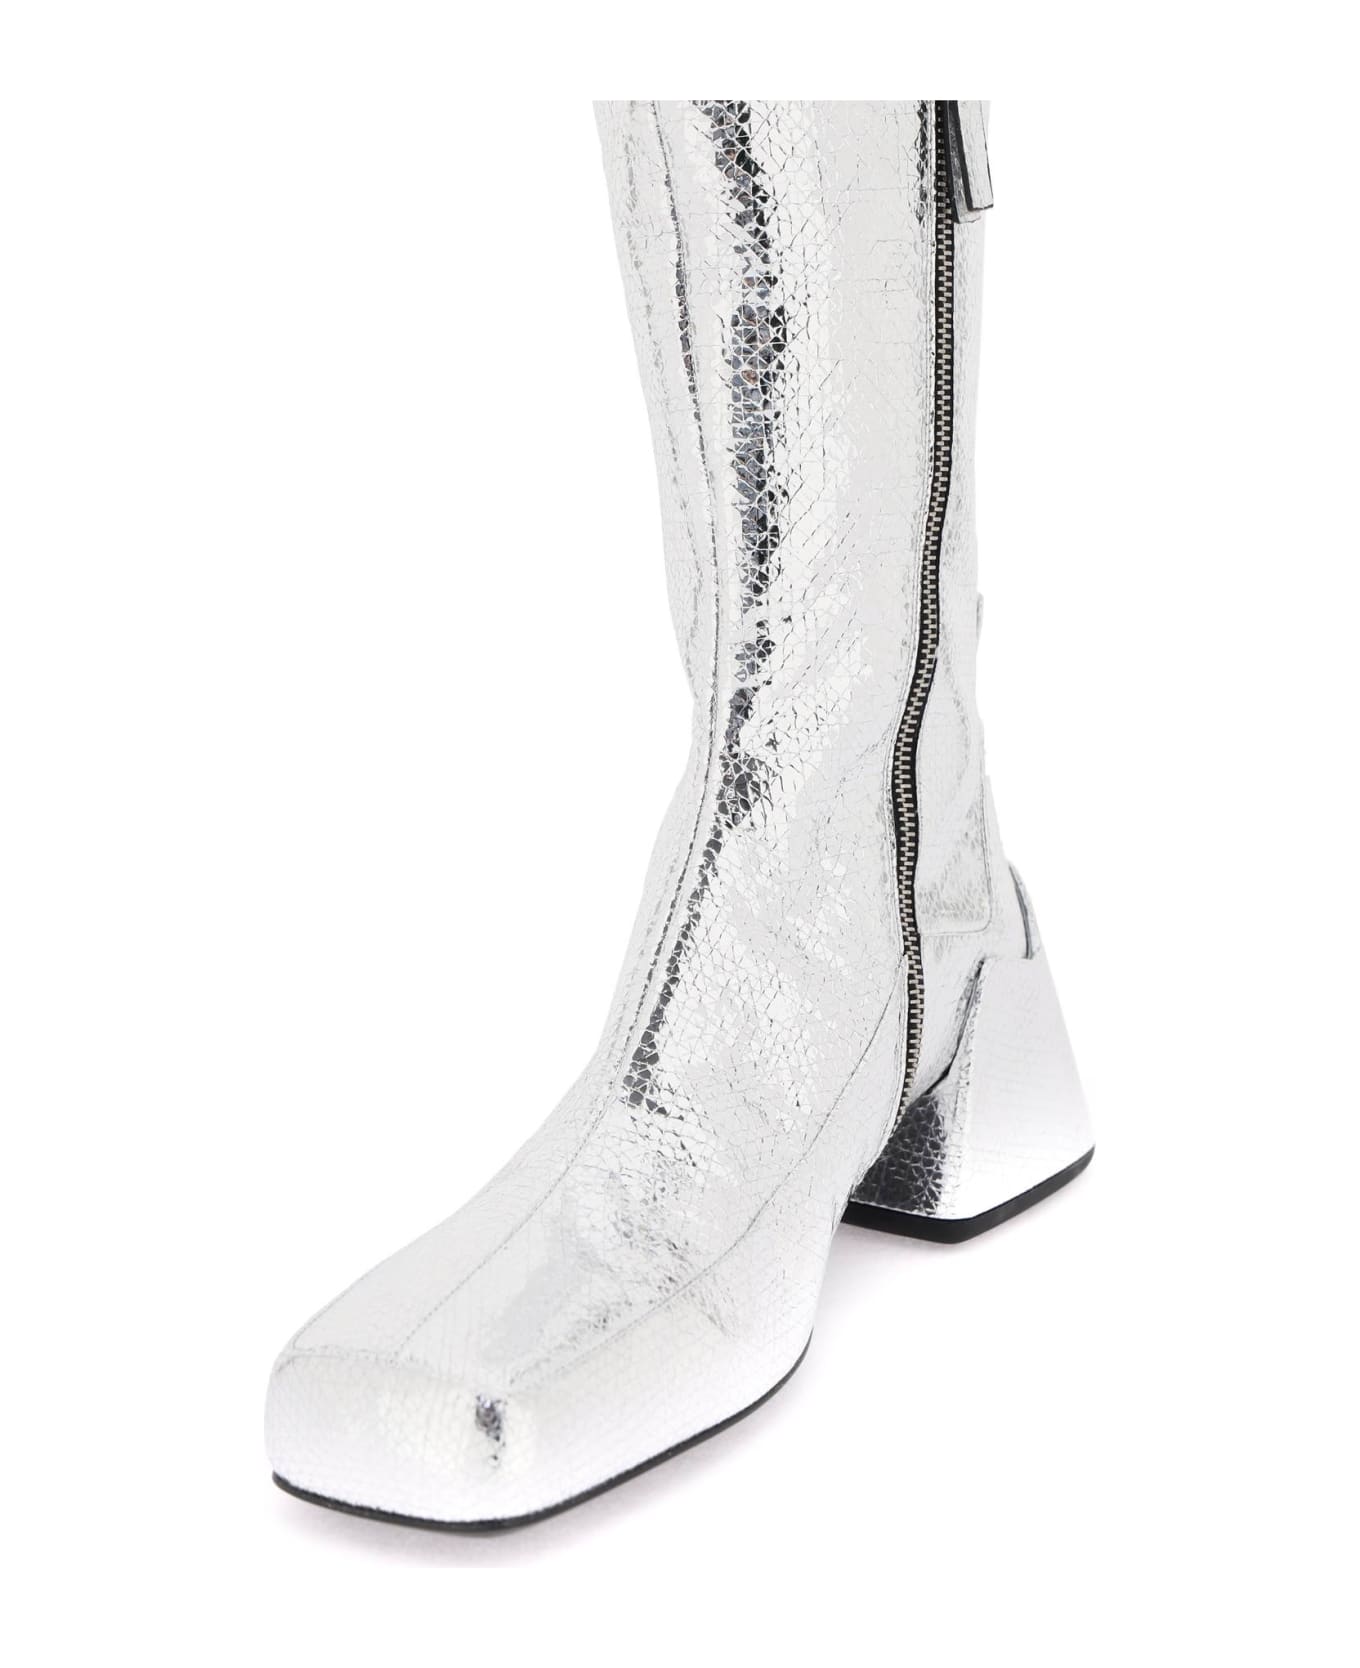 Jil Sander Cracked-effect Laminated Leather Boots - SILVER MOON (Silver)